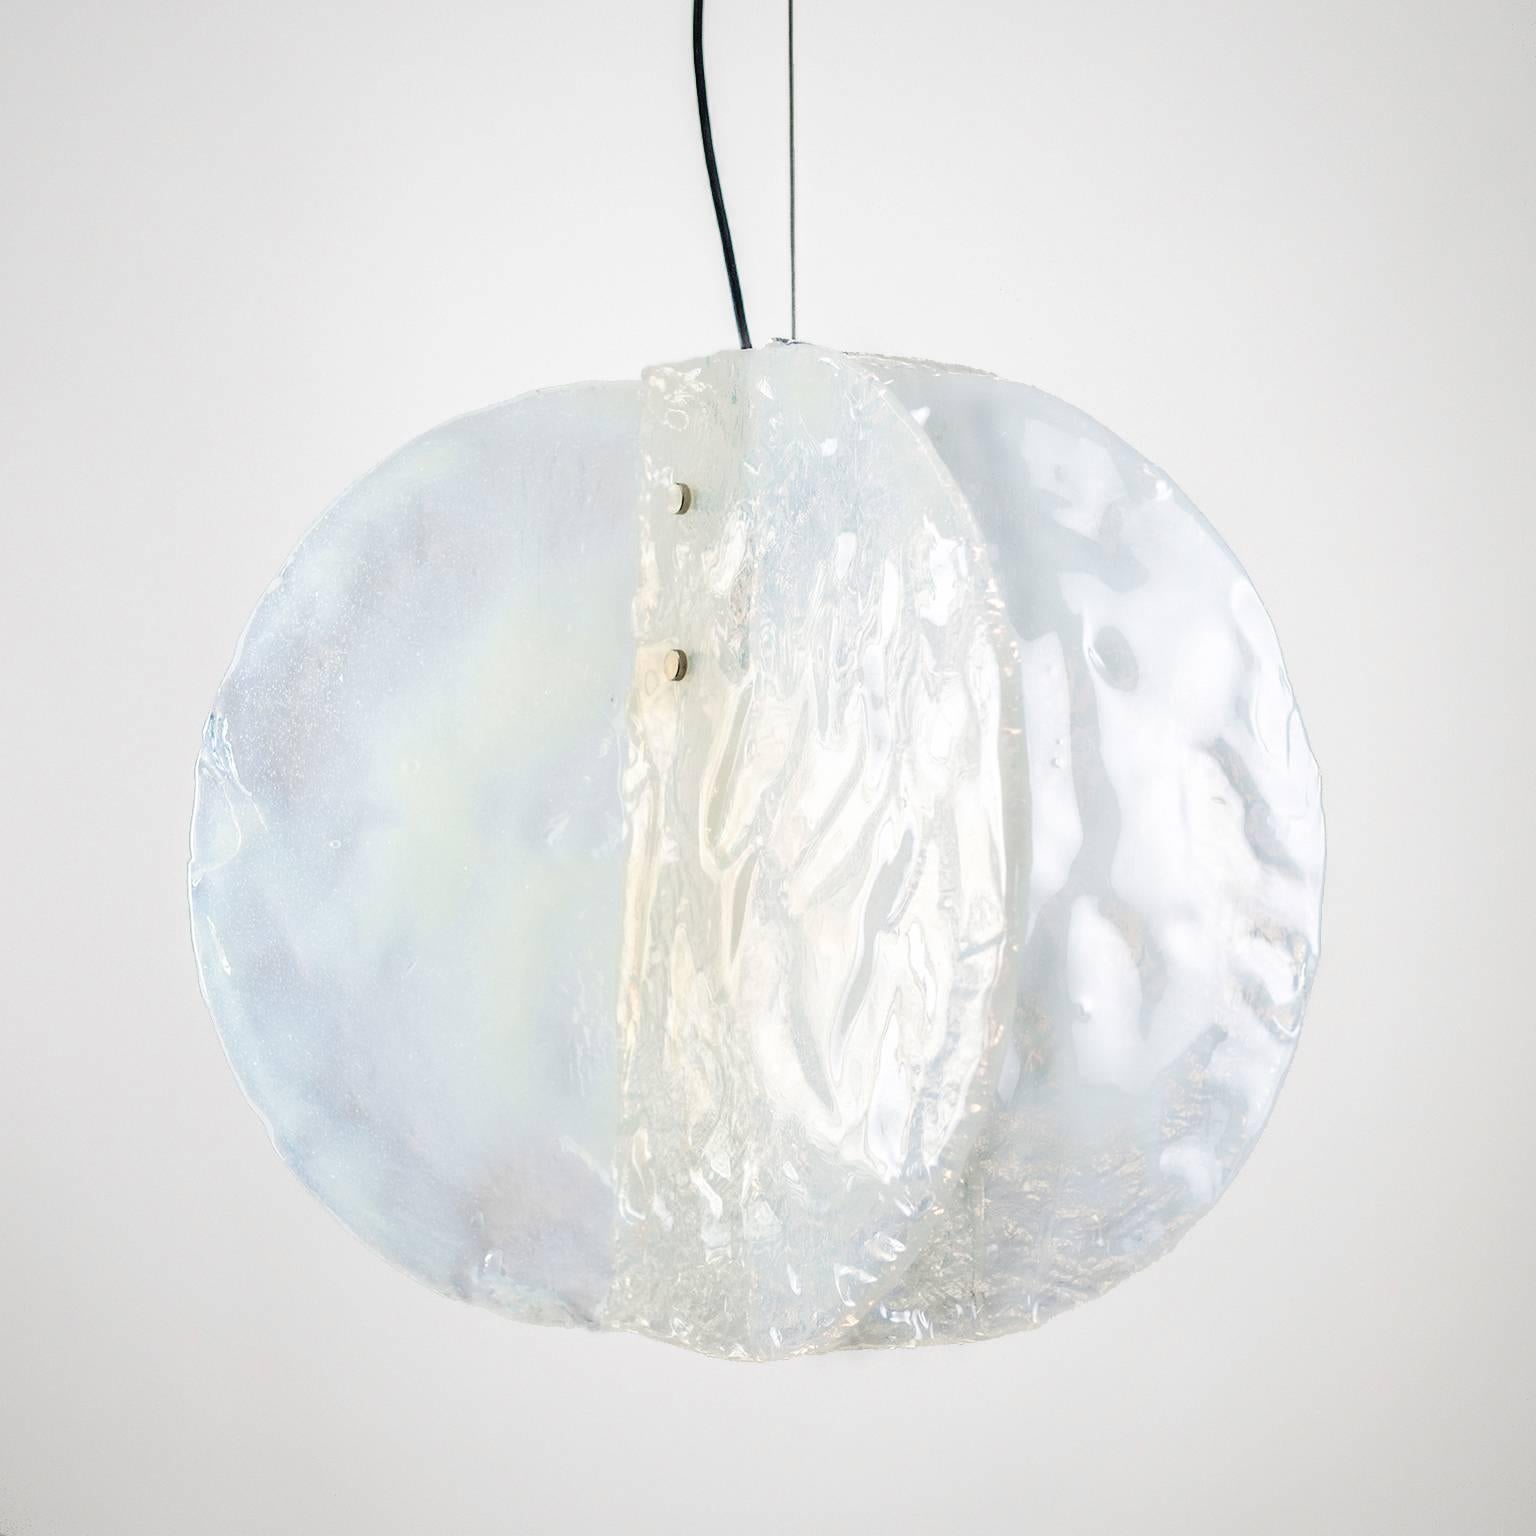 Impressive Murano glass pendant by Mazzega from the 1970s, composed of four large heavily textured slabs of 